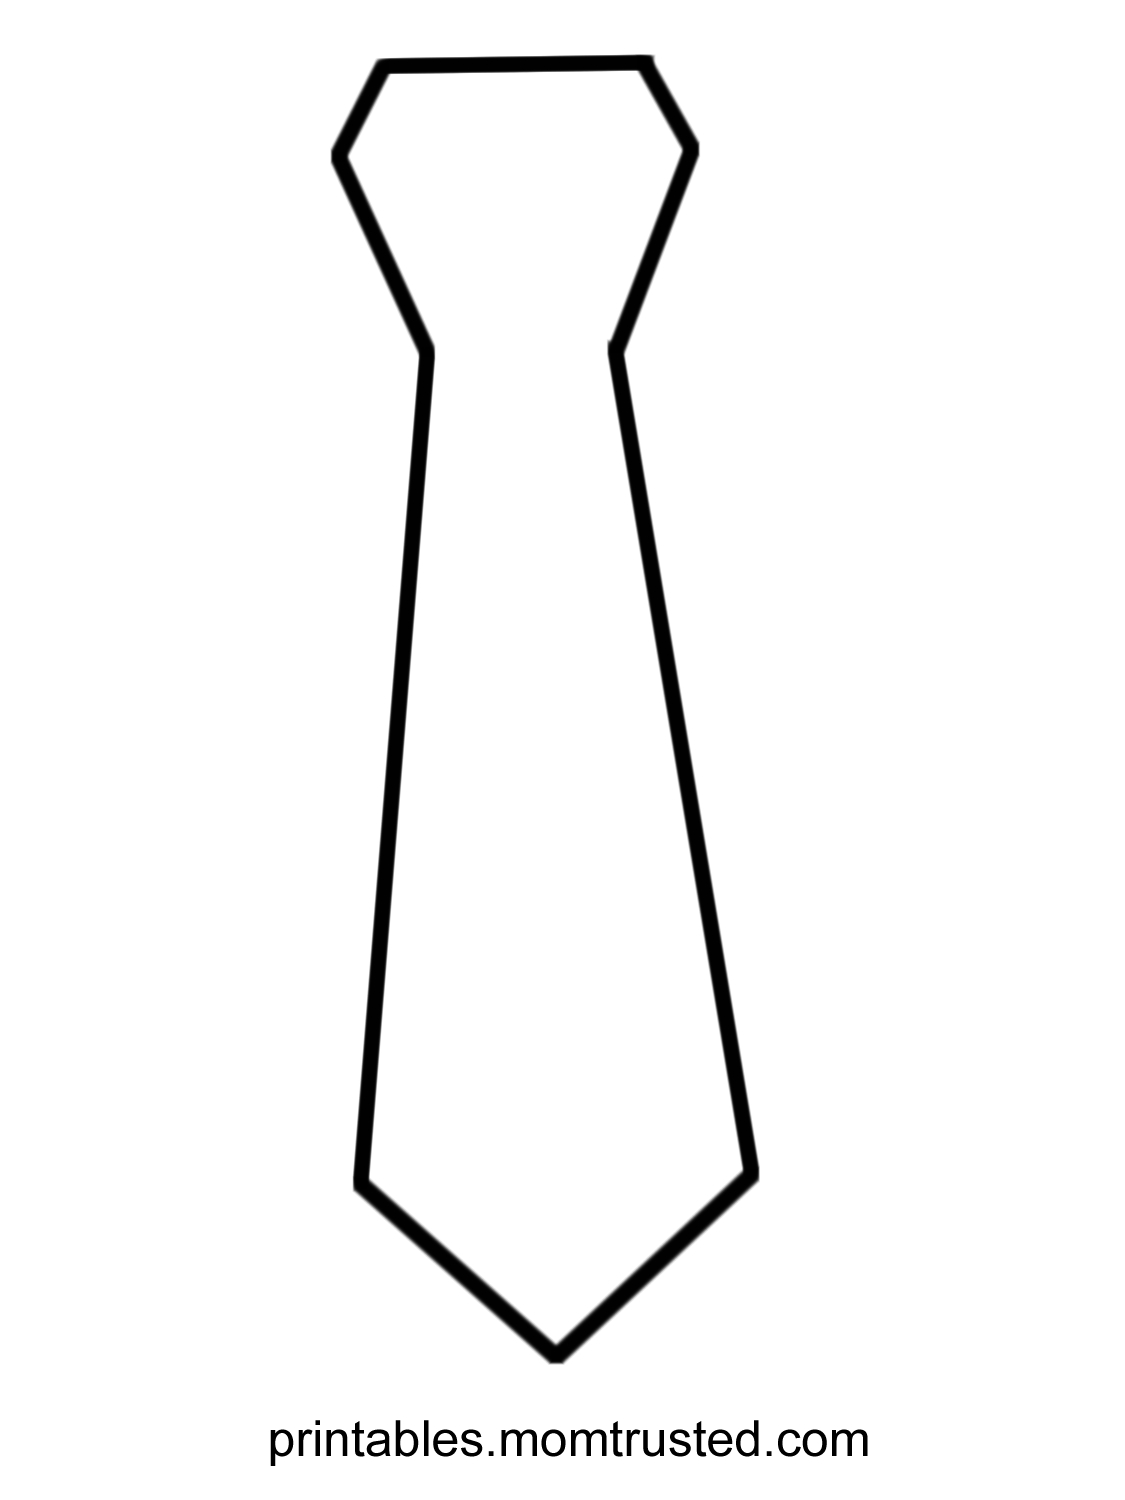 Fathers Day Tie Coloring Pages - Free Large Images | Teaching Ideas - Free Printable Tie Template